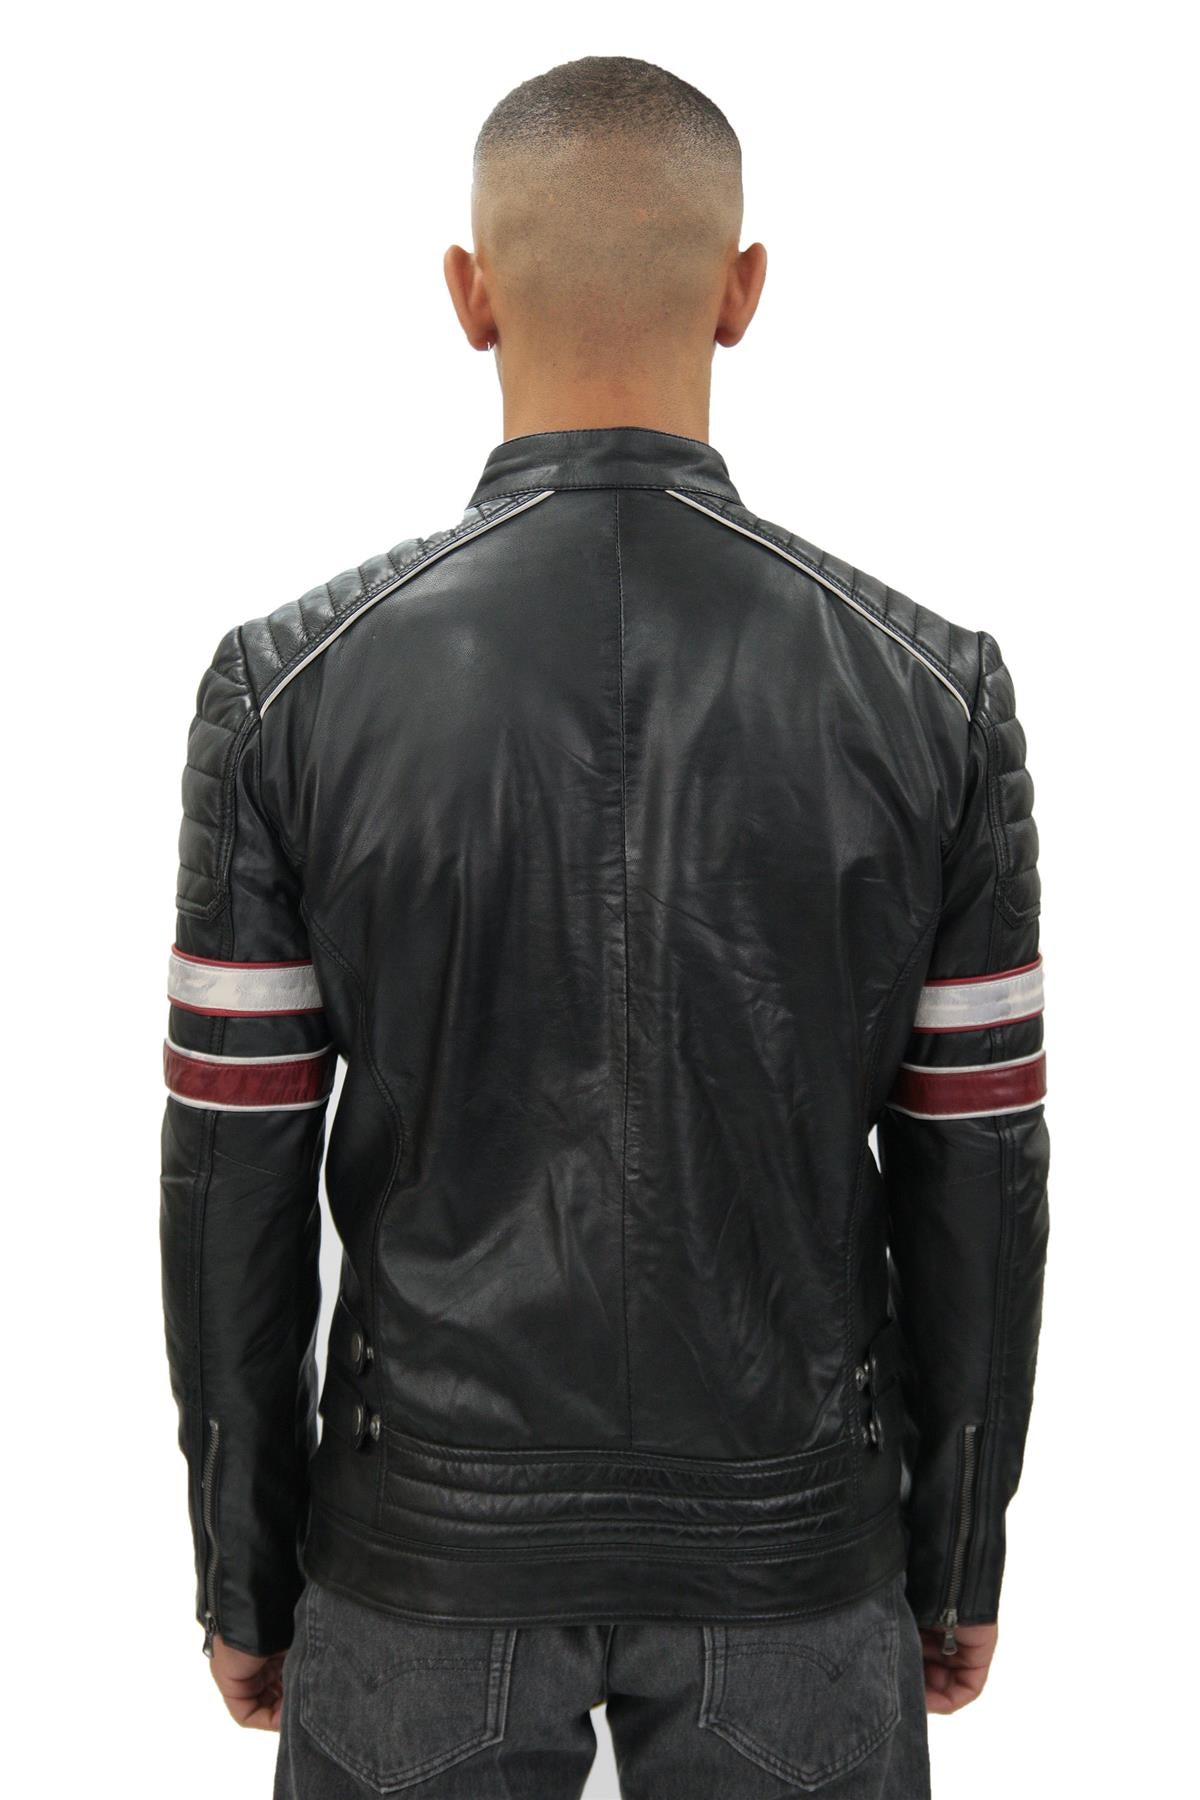 Mens Quilted Leather Racing Jacket-Madrid